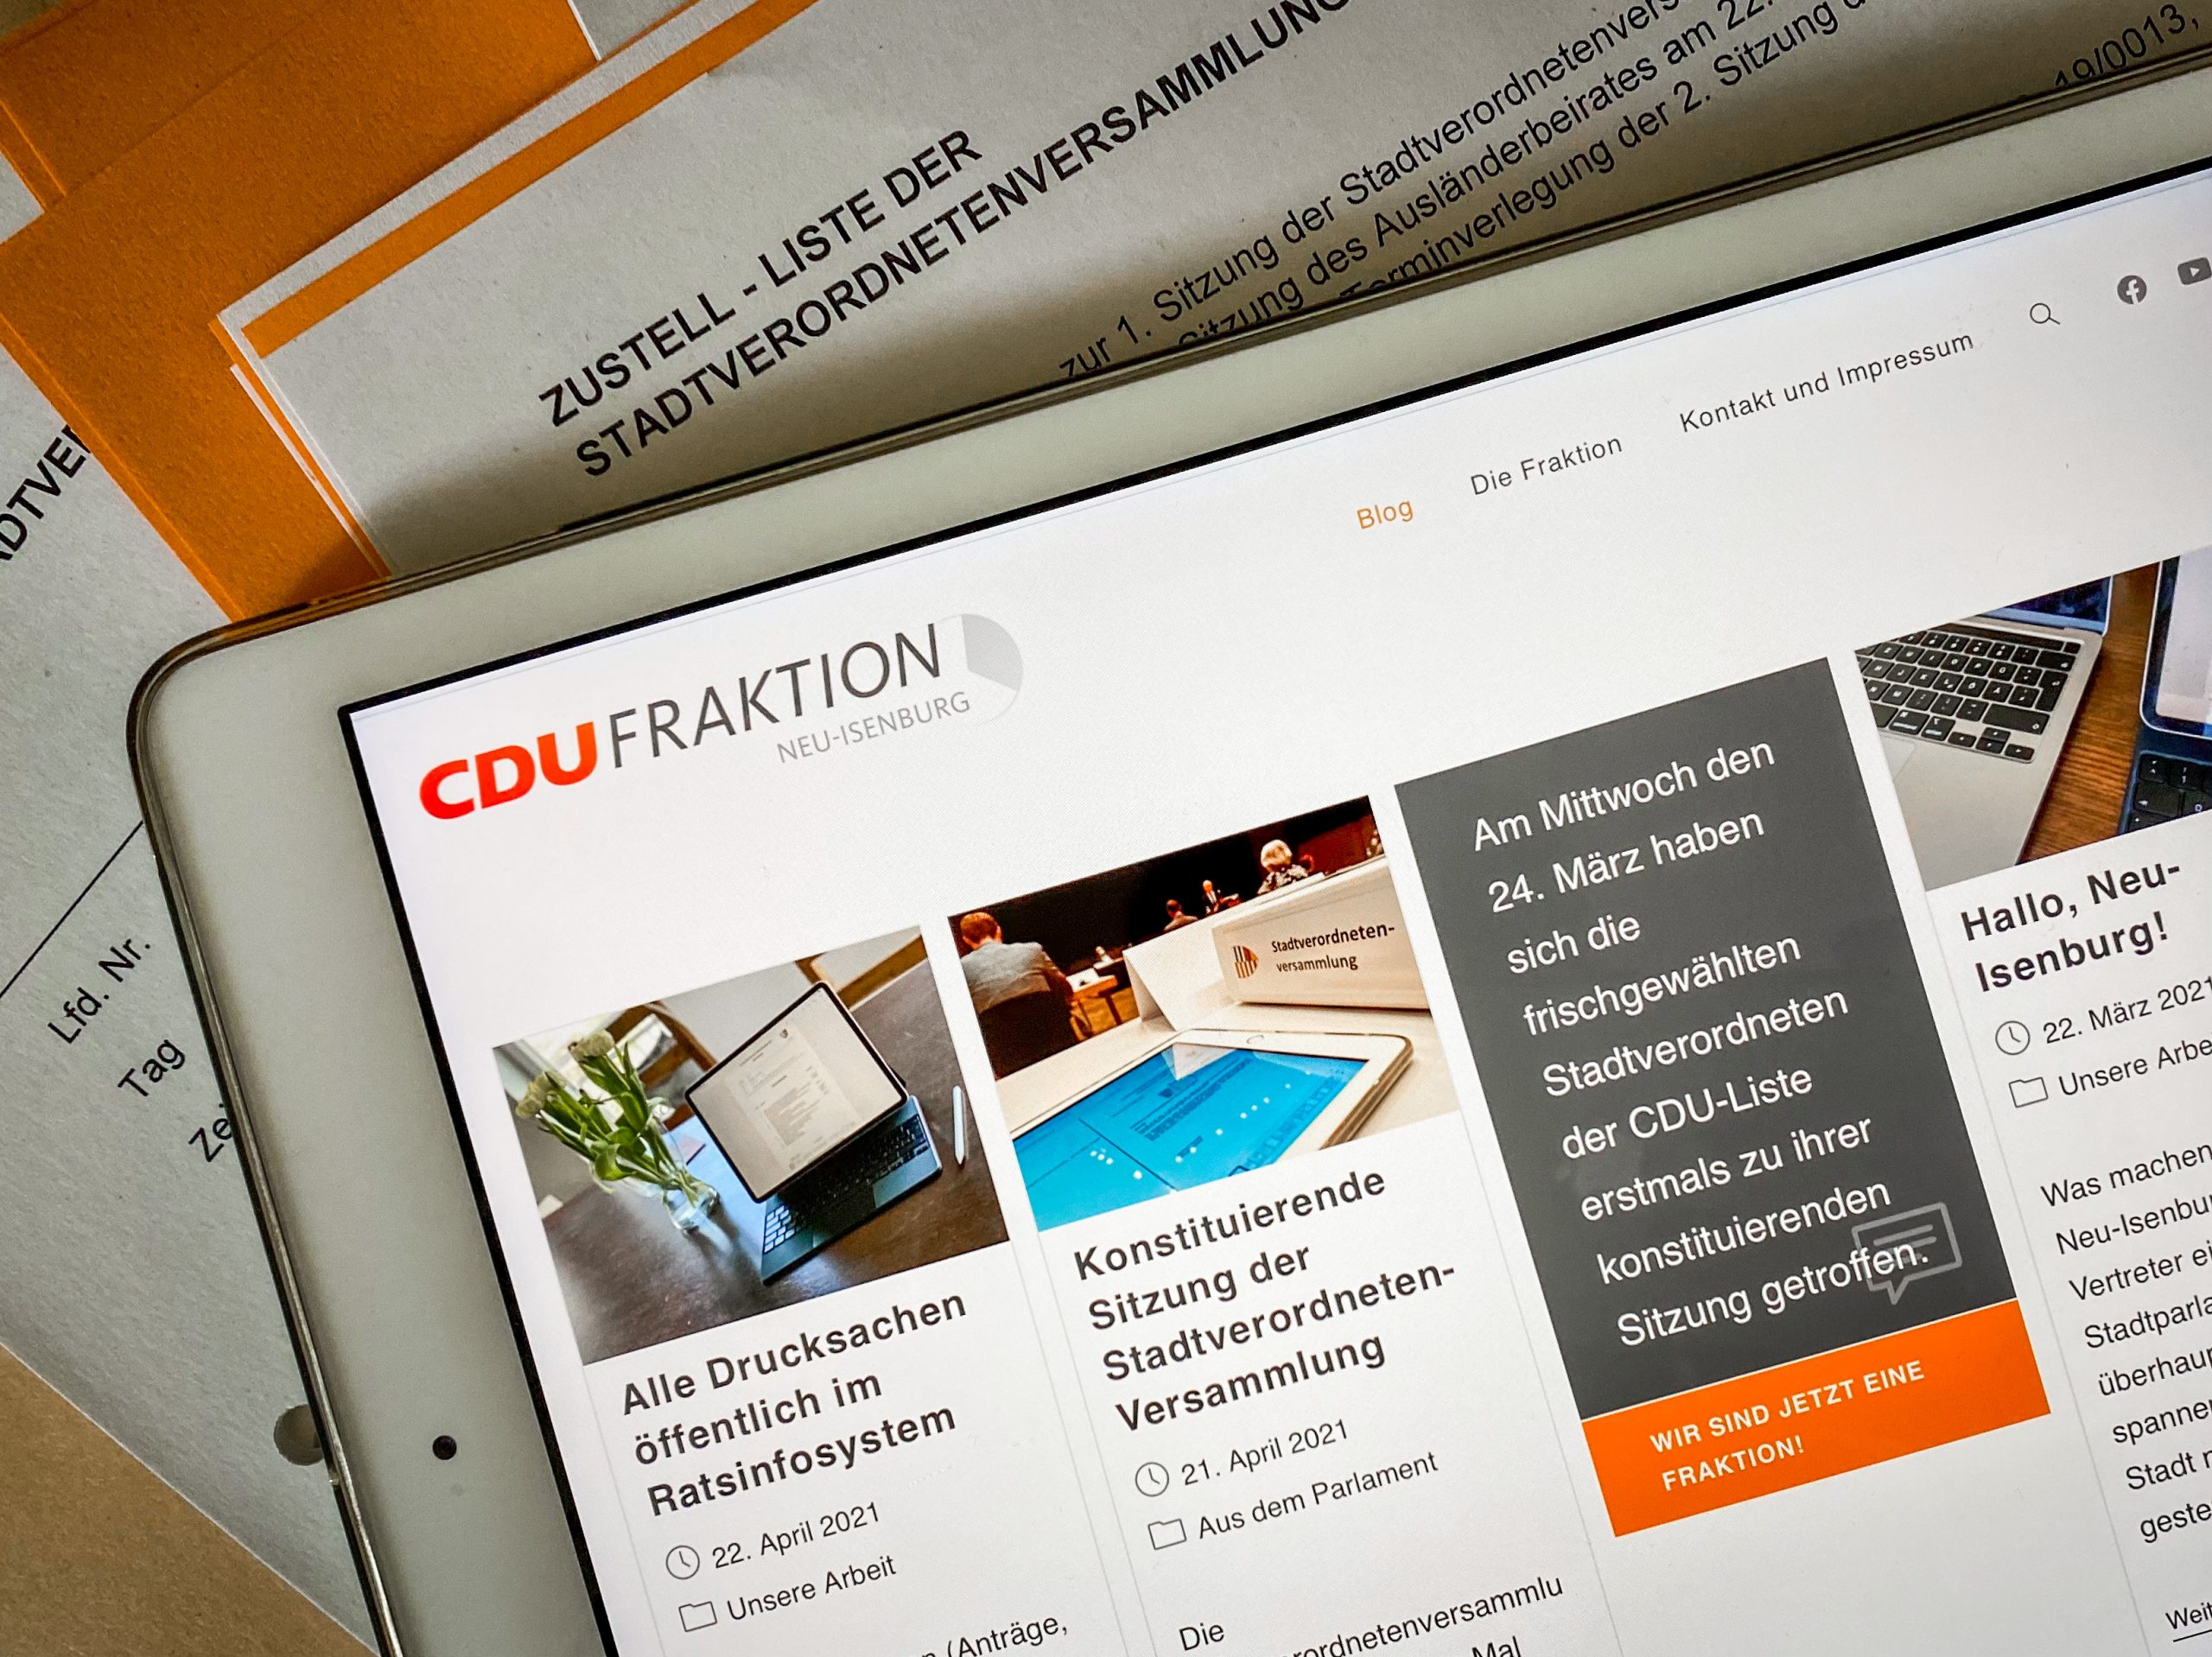 You are currently viewing Die CDU-Fraktion bloggt!